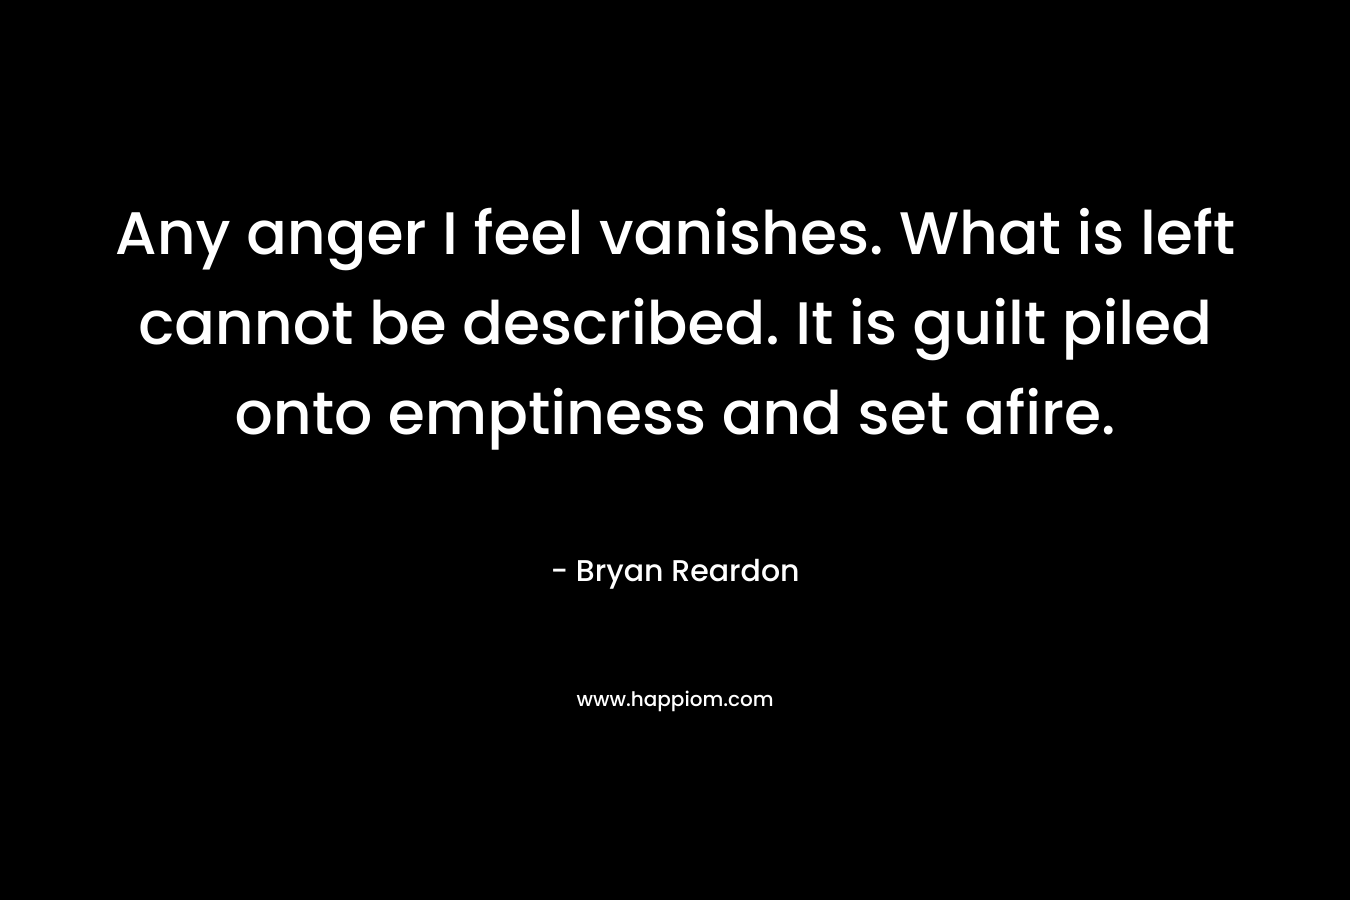 Any anger I feel vanishes. What is left cannot be described. It is guilt piled onto emptiness and set afire. – Bryan Reardon